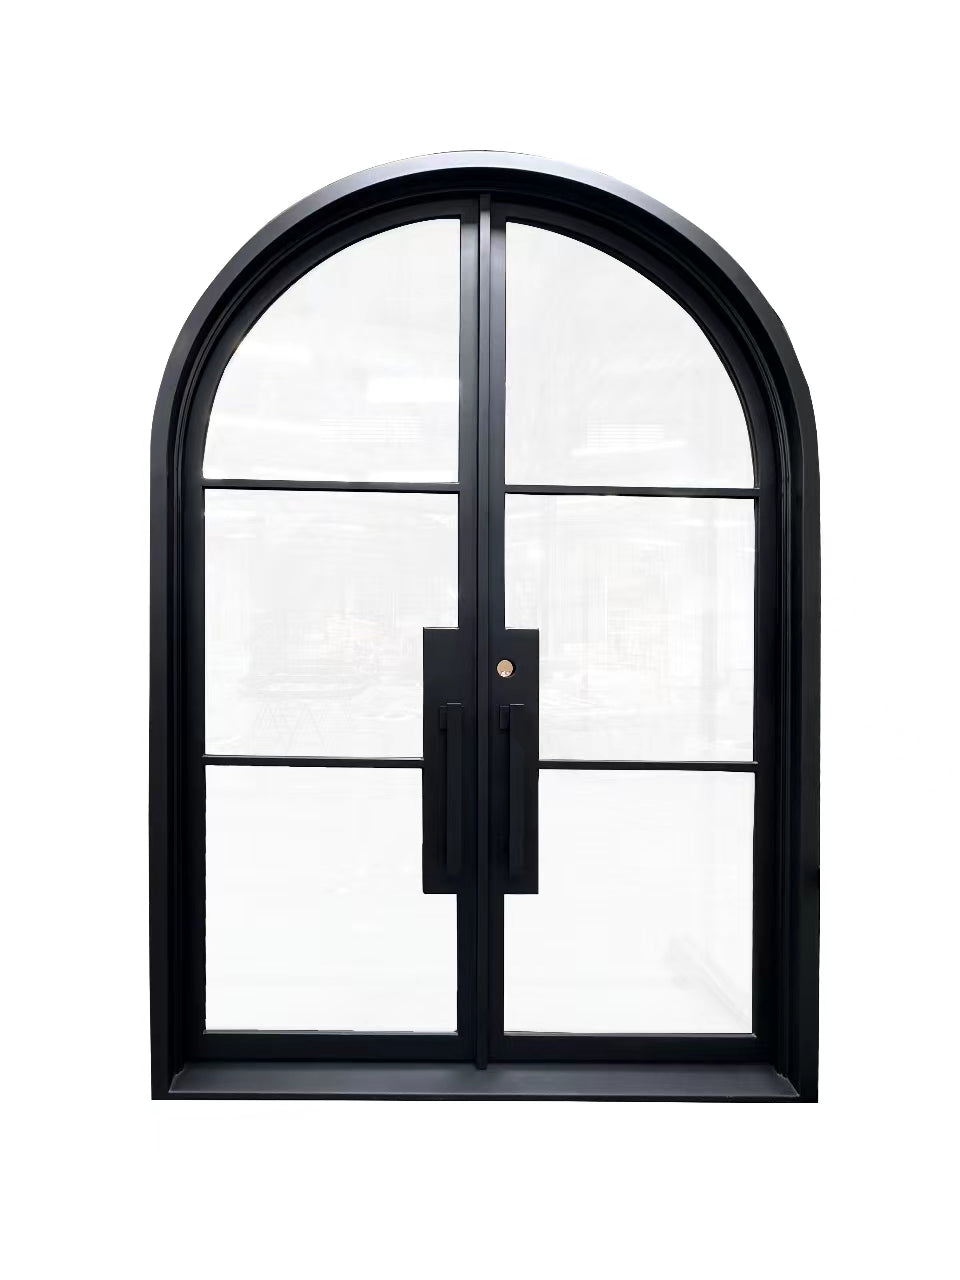 Laredo Model Double Front Entry Iron Door With Tempered Low E Clear Glass Matt Black Finish